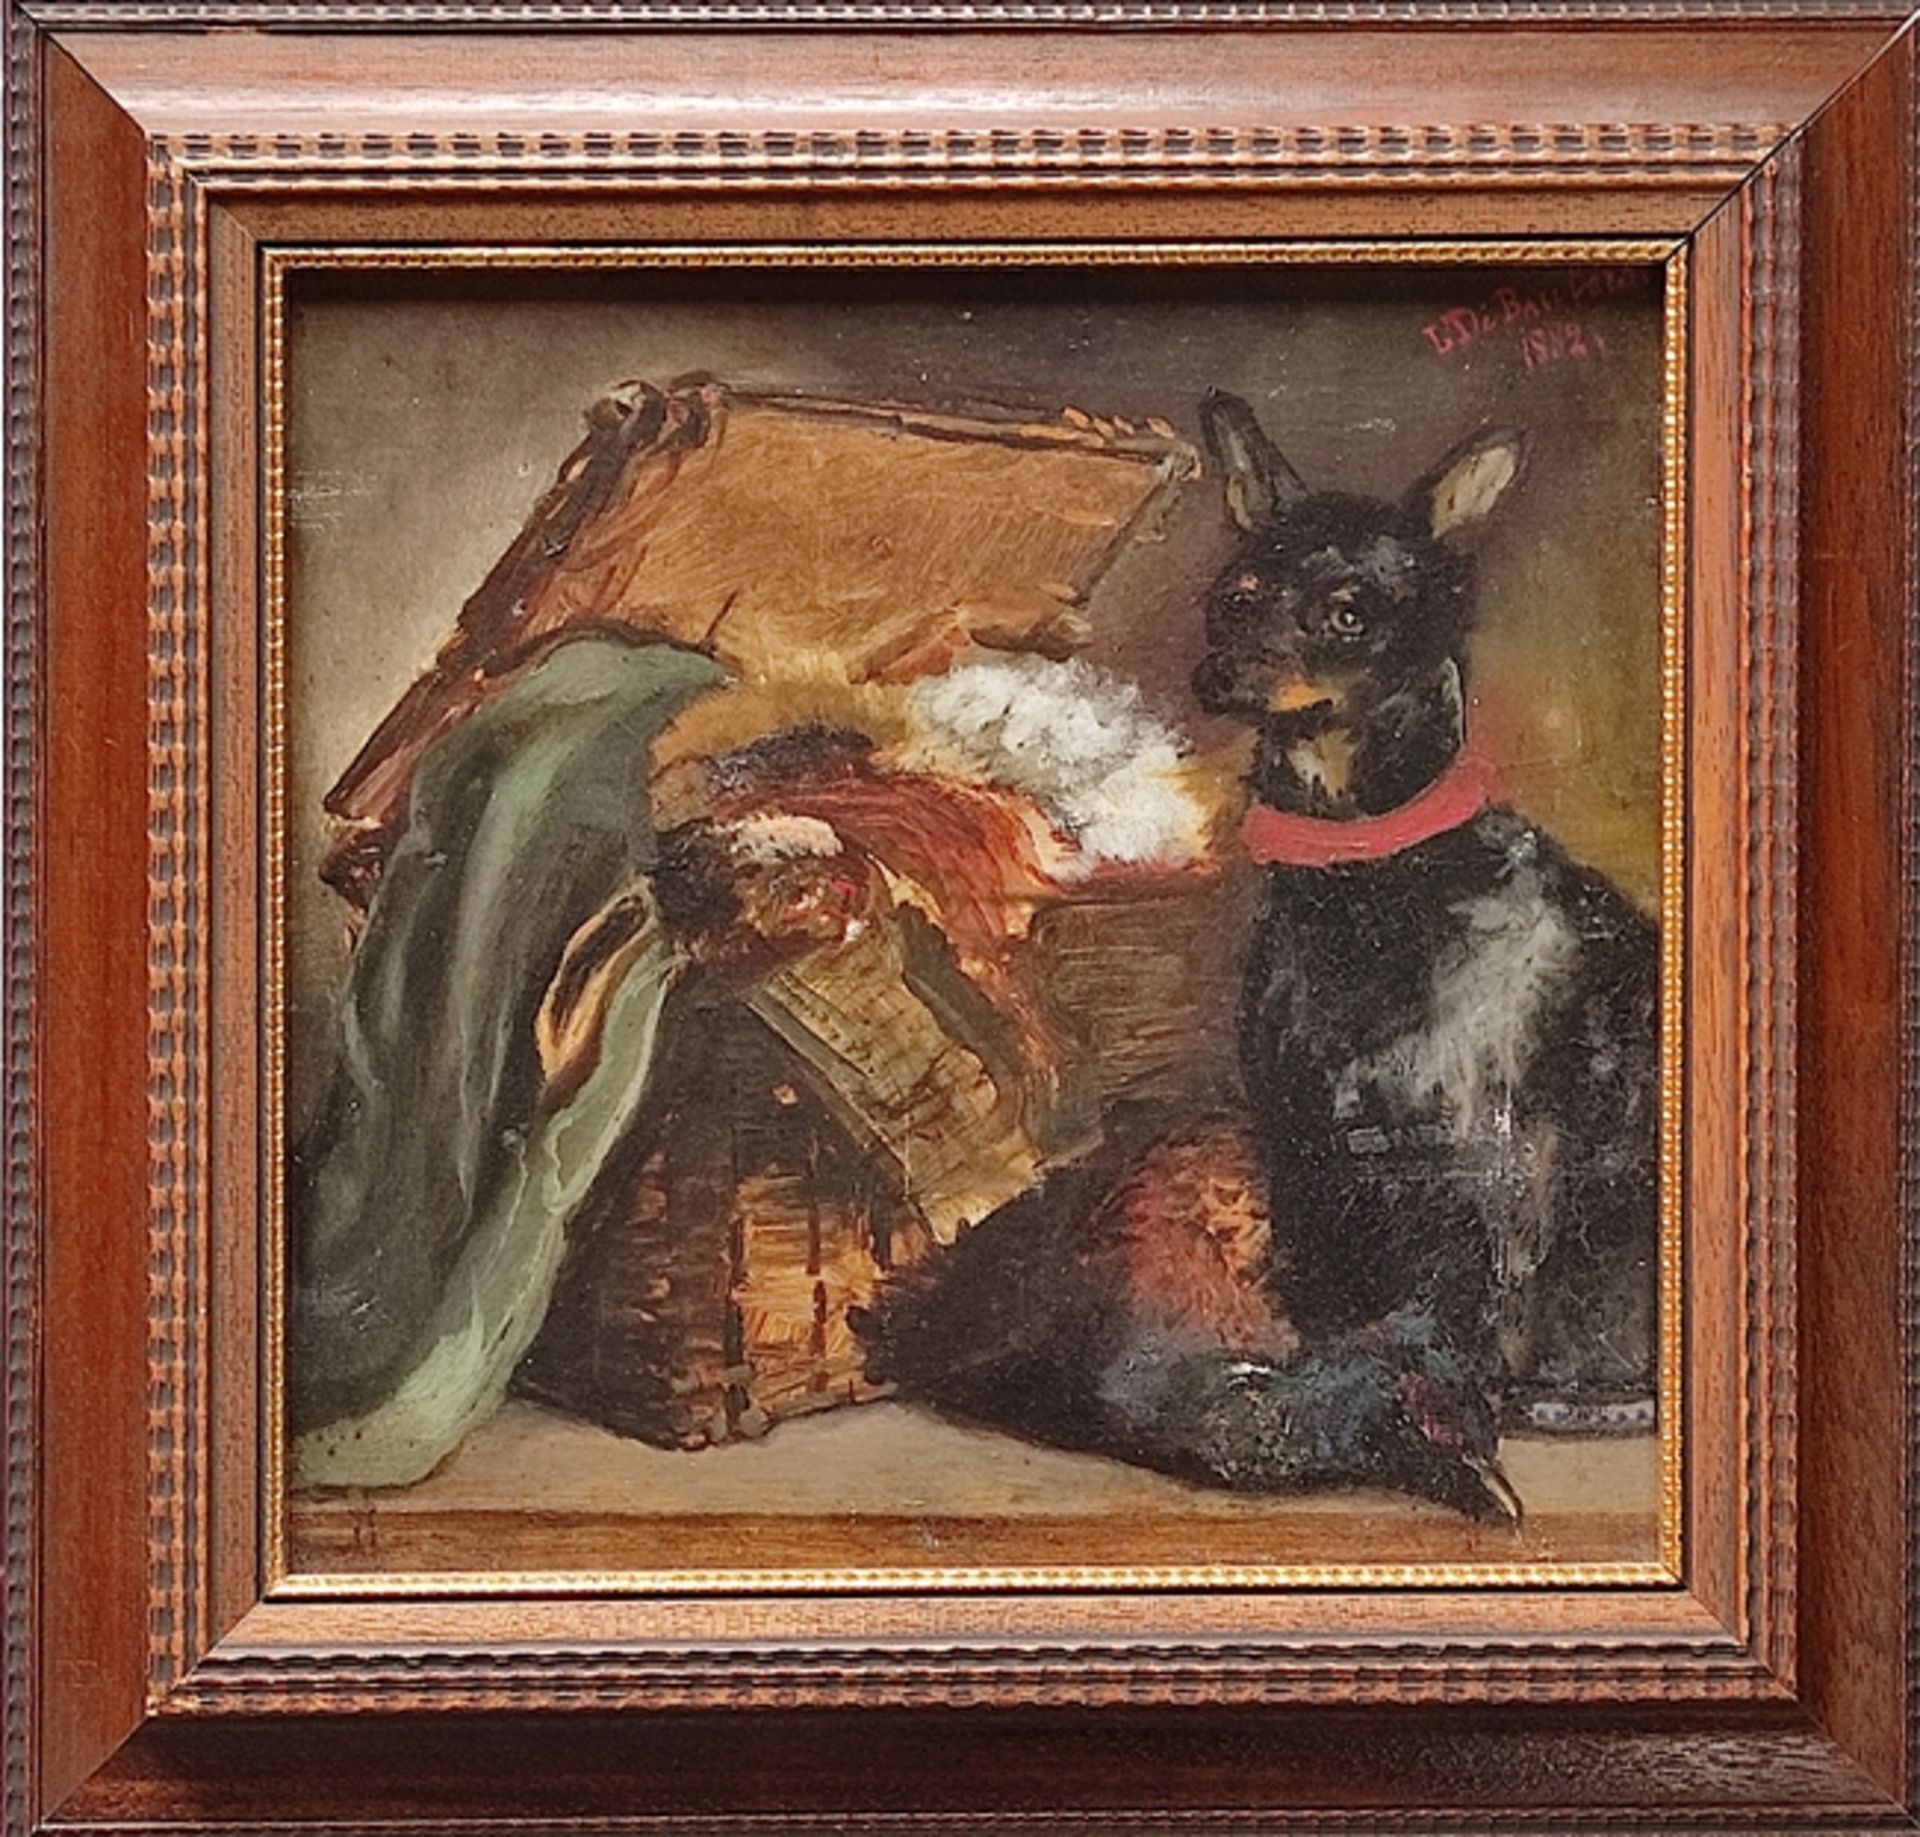 De Baulers, L. (19th century) "Hunting Still Life" with Hare, Pheasant and Pinscher, oil on canvas, - Image 2 of 5